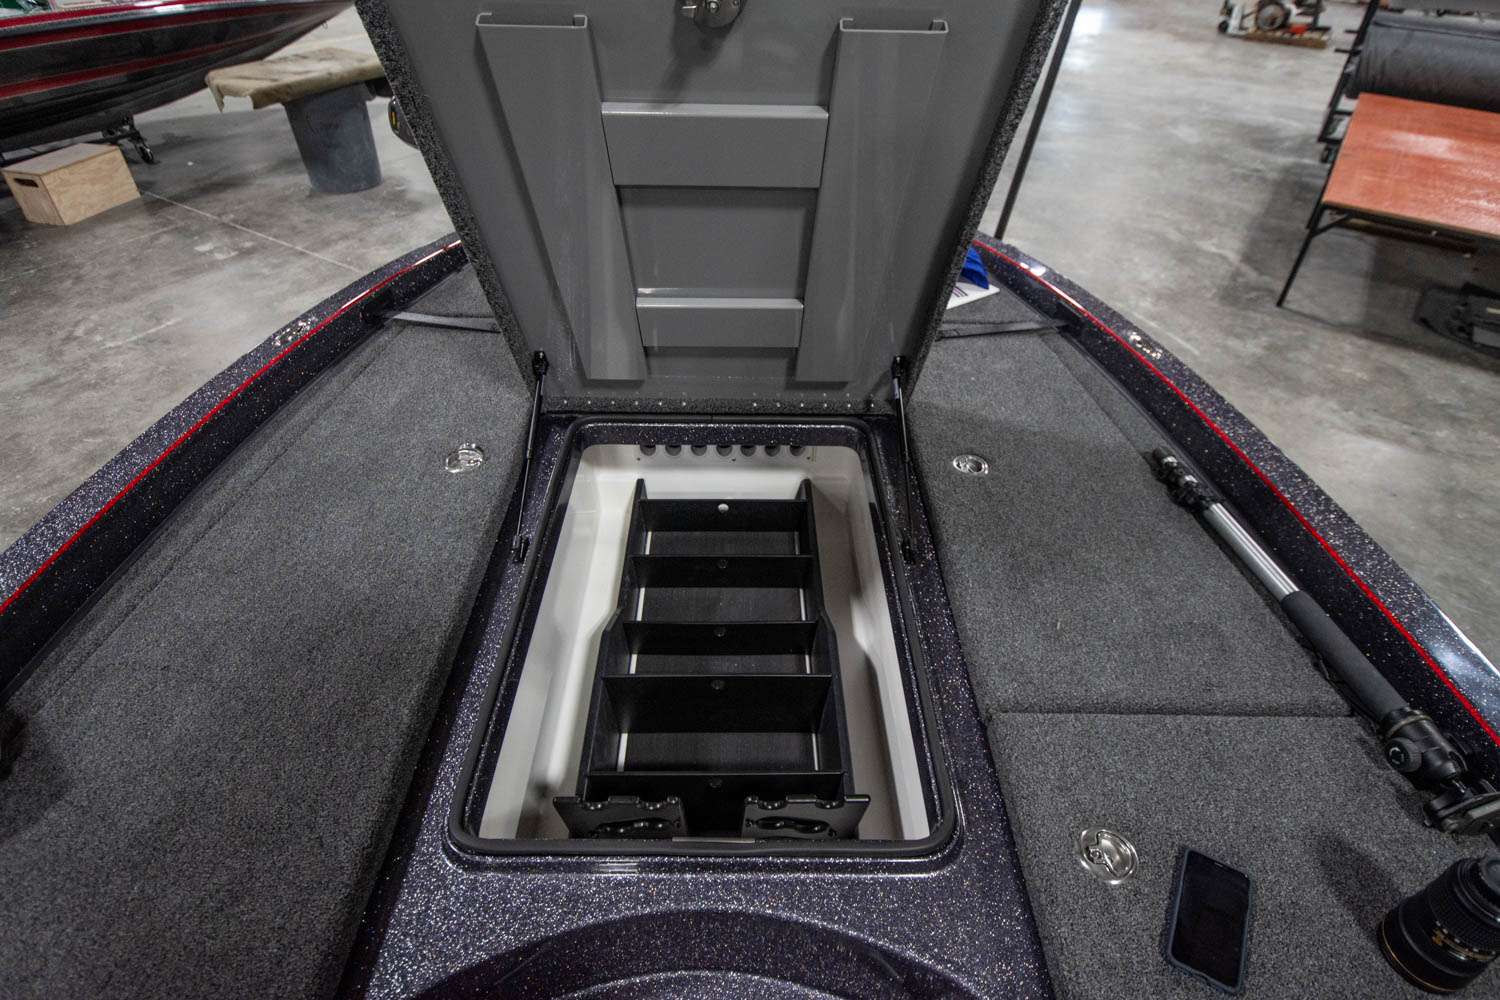 The huge center compartment has adjustable segmented areas for tackle storage, as well as another area to store rods.
